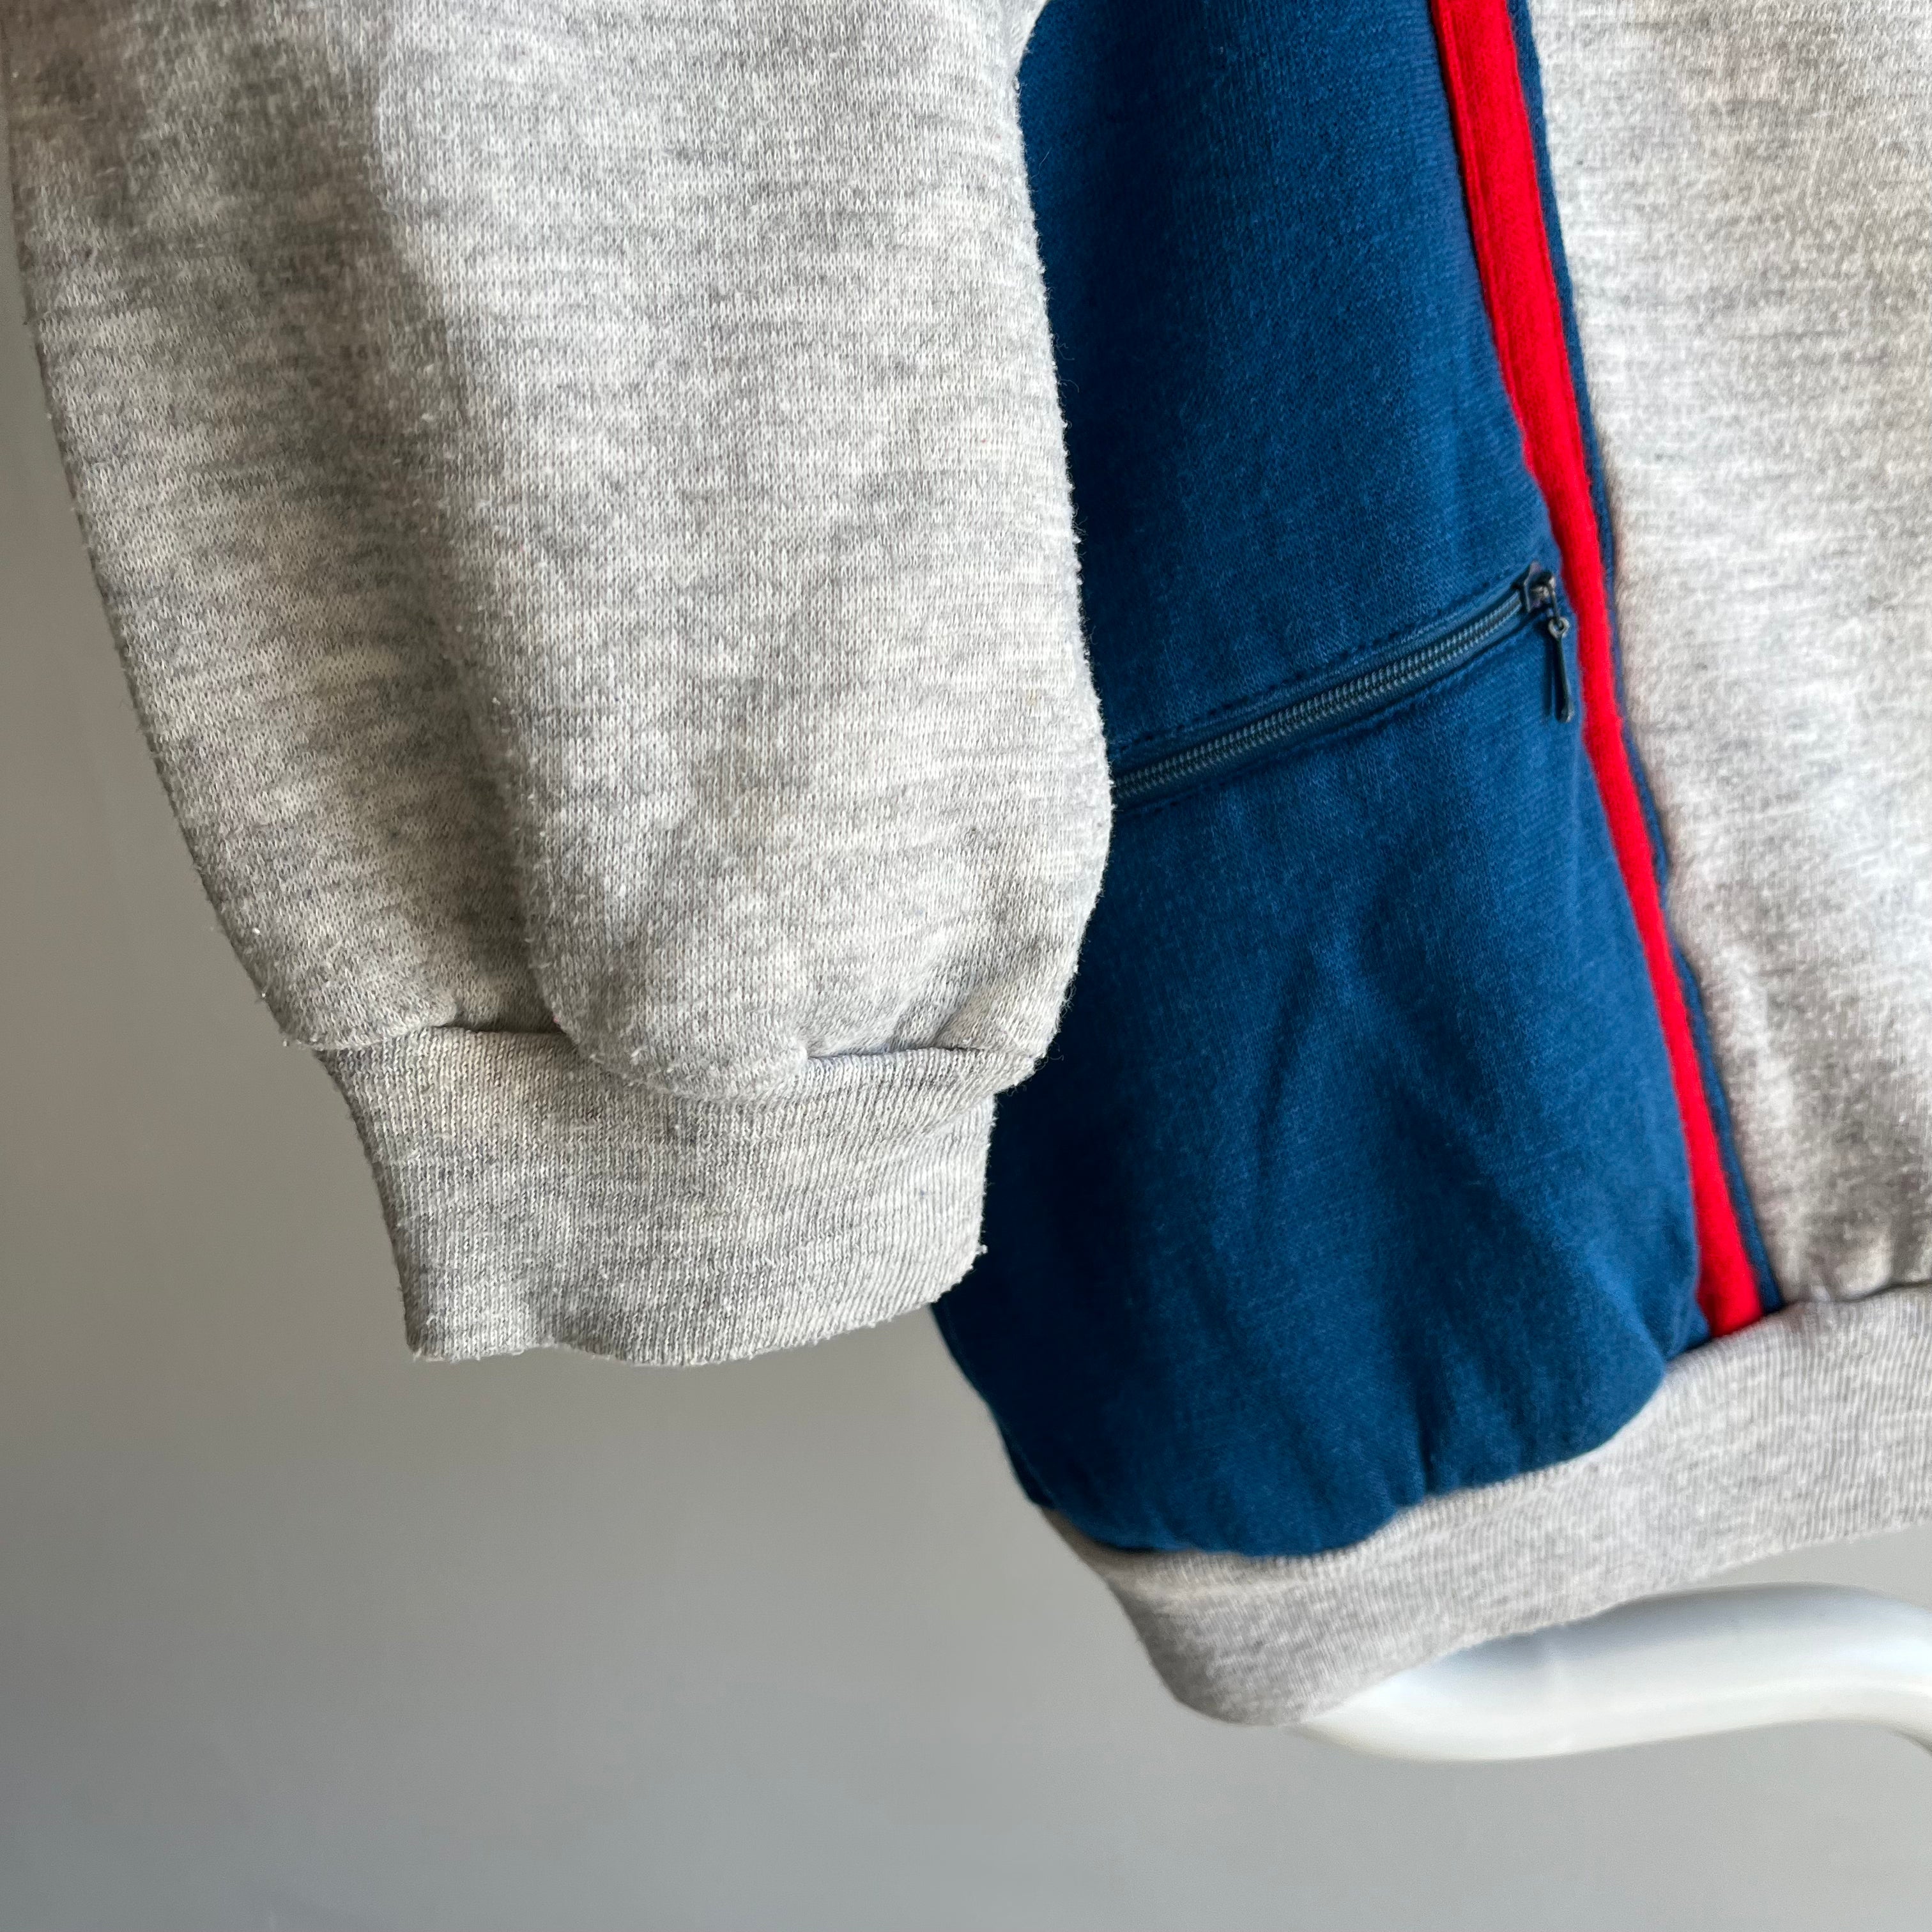 1980s Color Block Red, Gray and Blue Sweatshirt with Zip Pockets